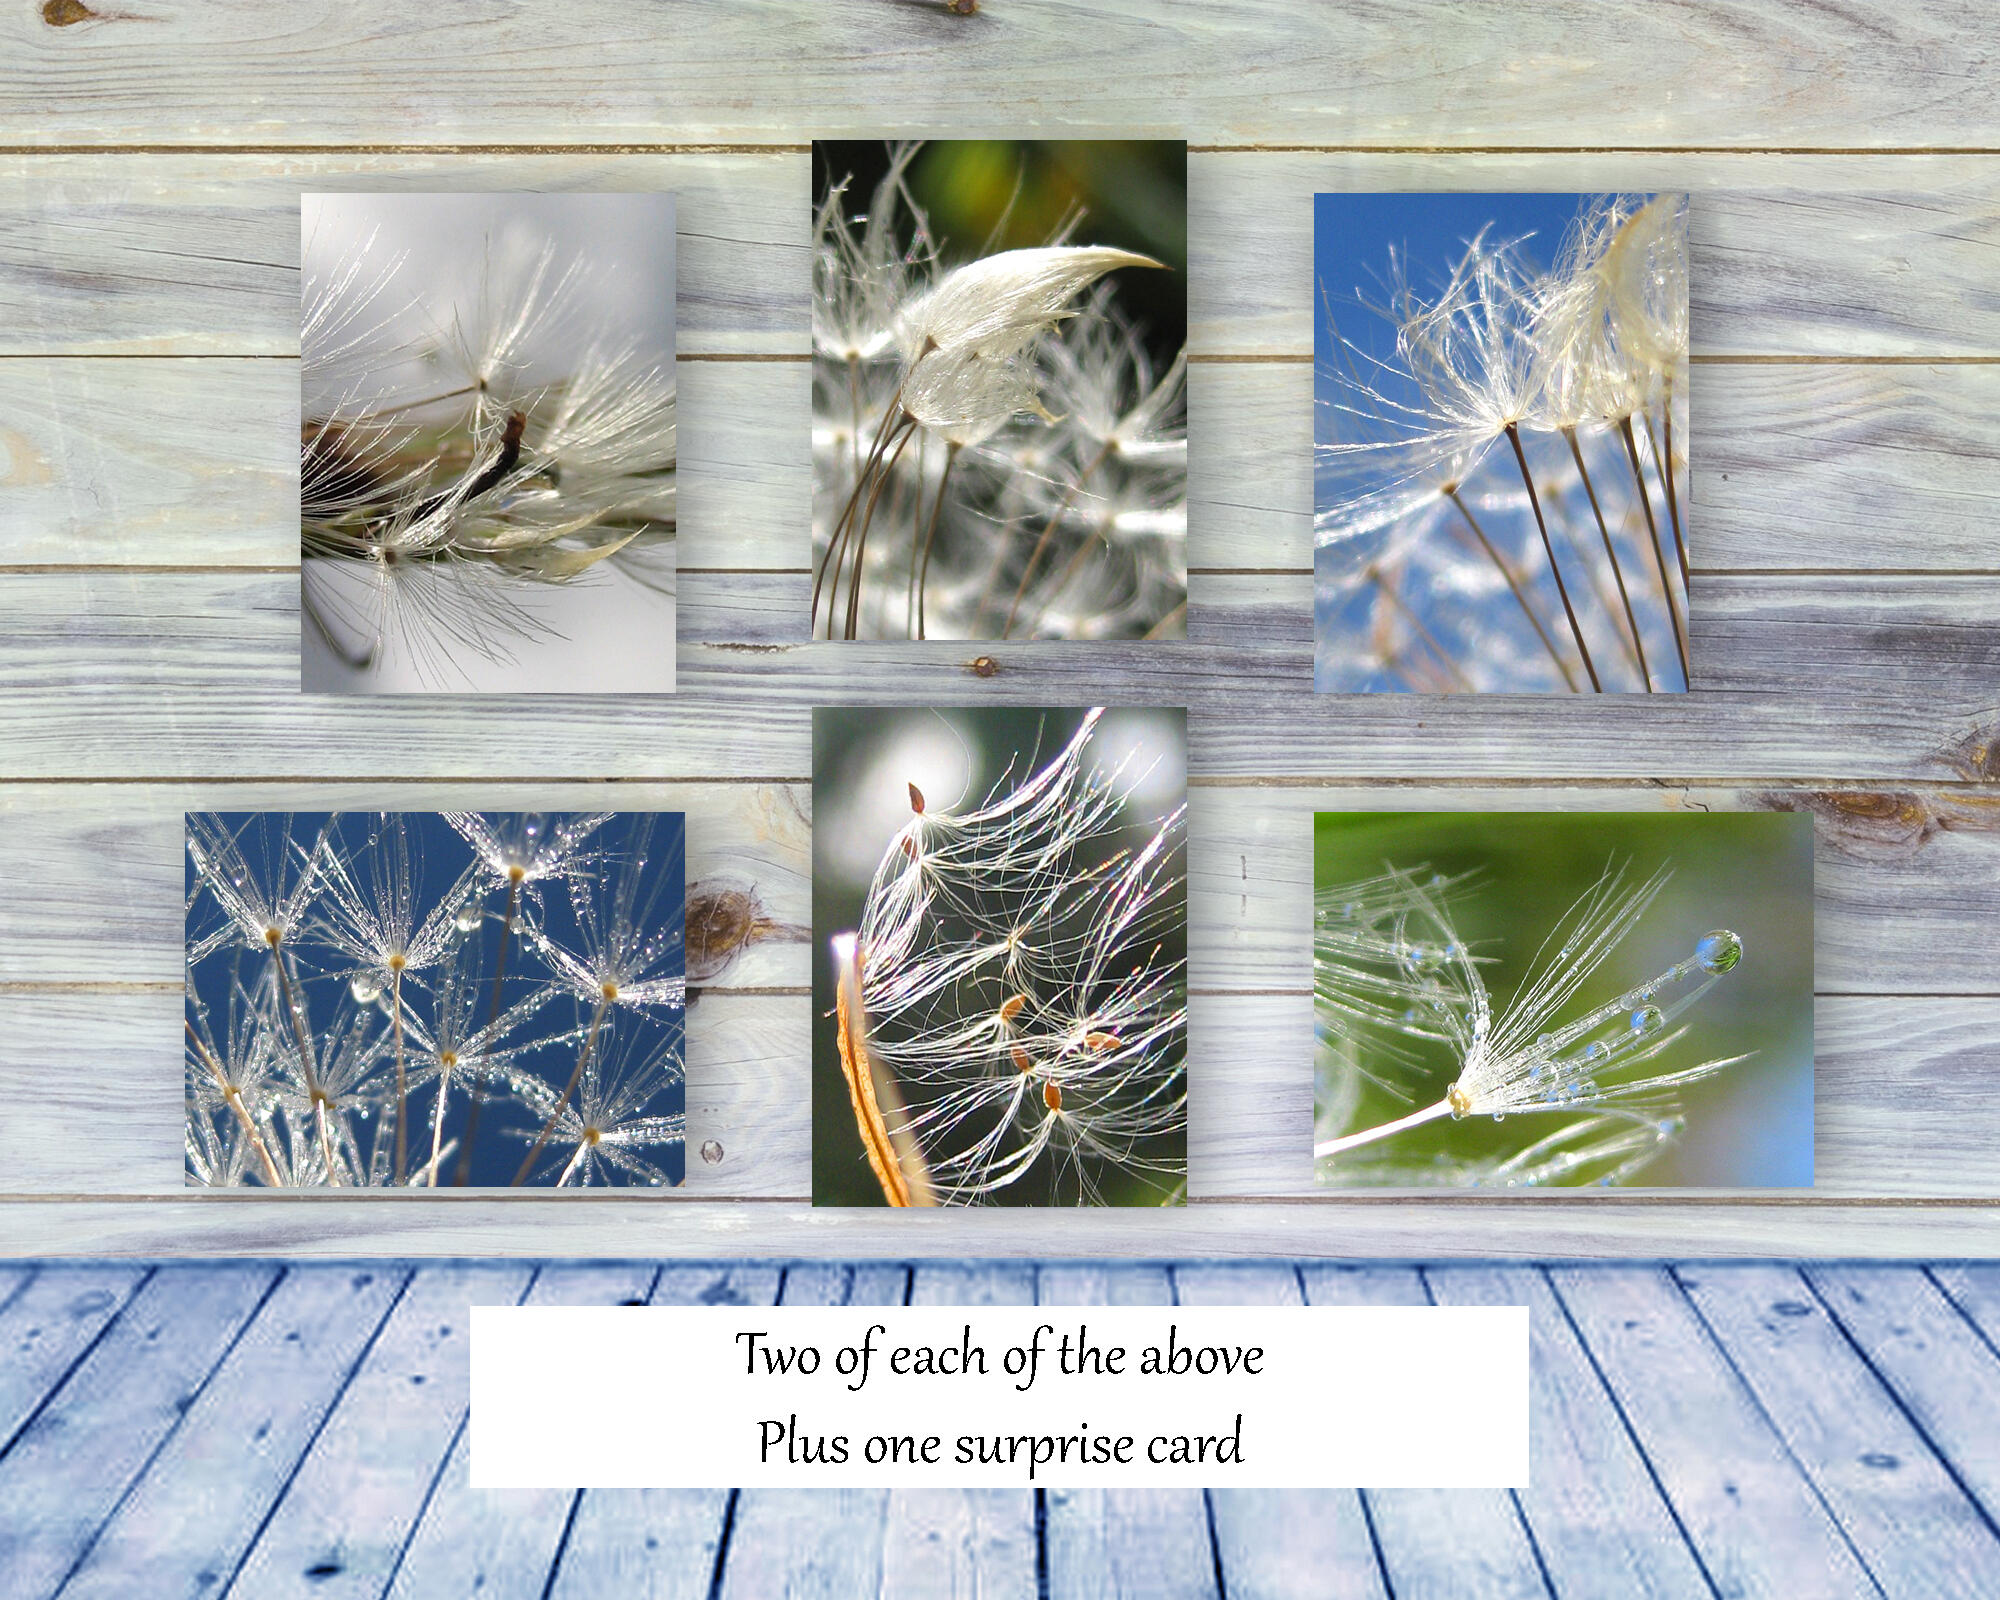 Dandelions II - Colorful, botanical, greeting card collection by The Poetry of Nature, Stories in nature photo cards with poems. Boxed Set Baker's Dozen